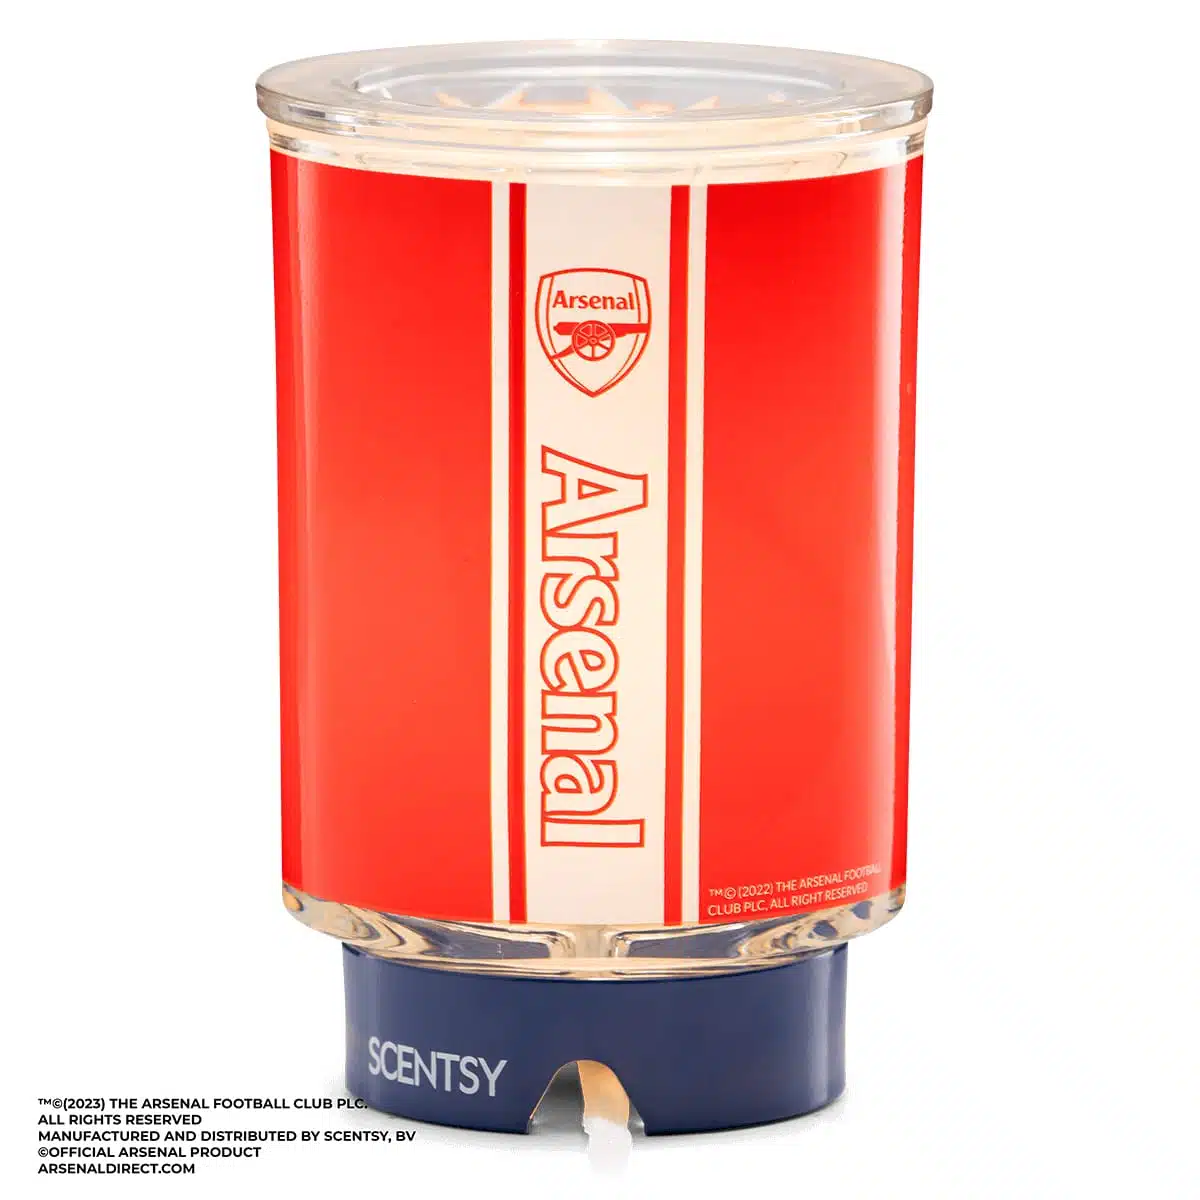 Arsenal FC - Scentsy Warmer Styled